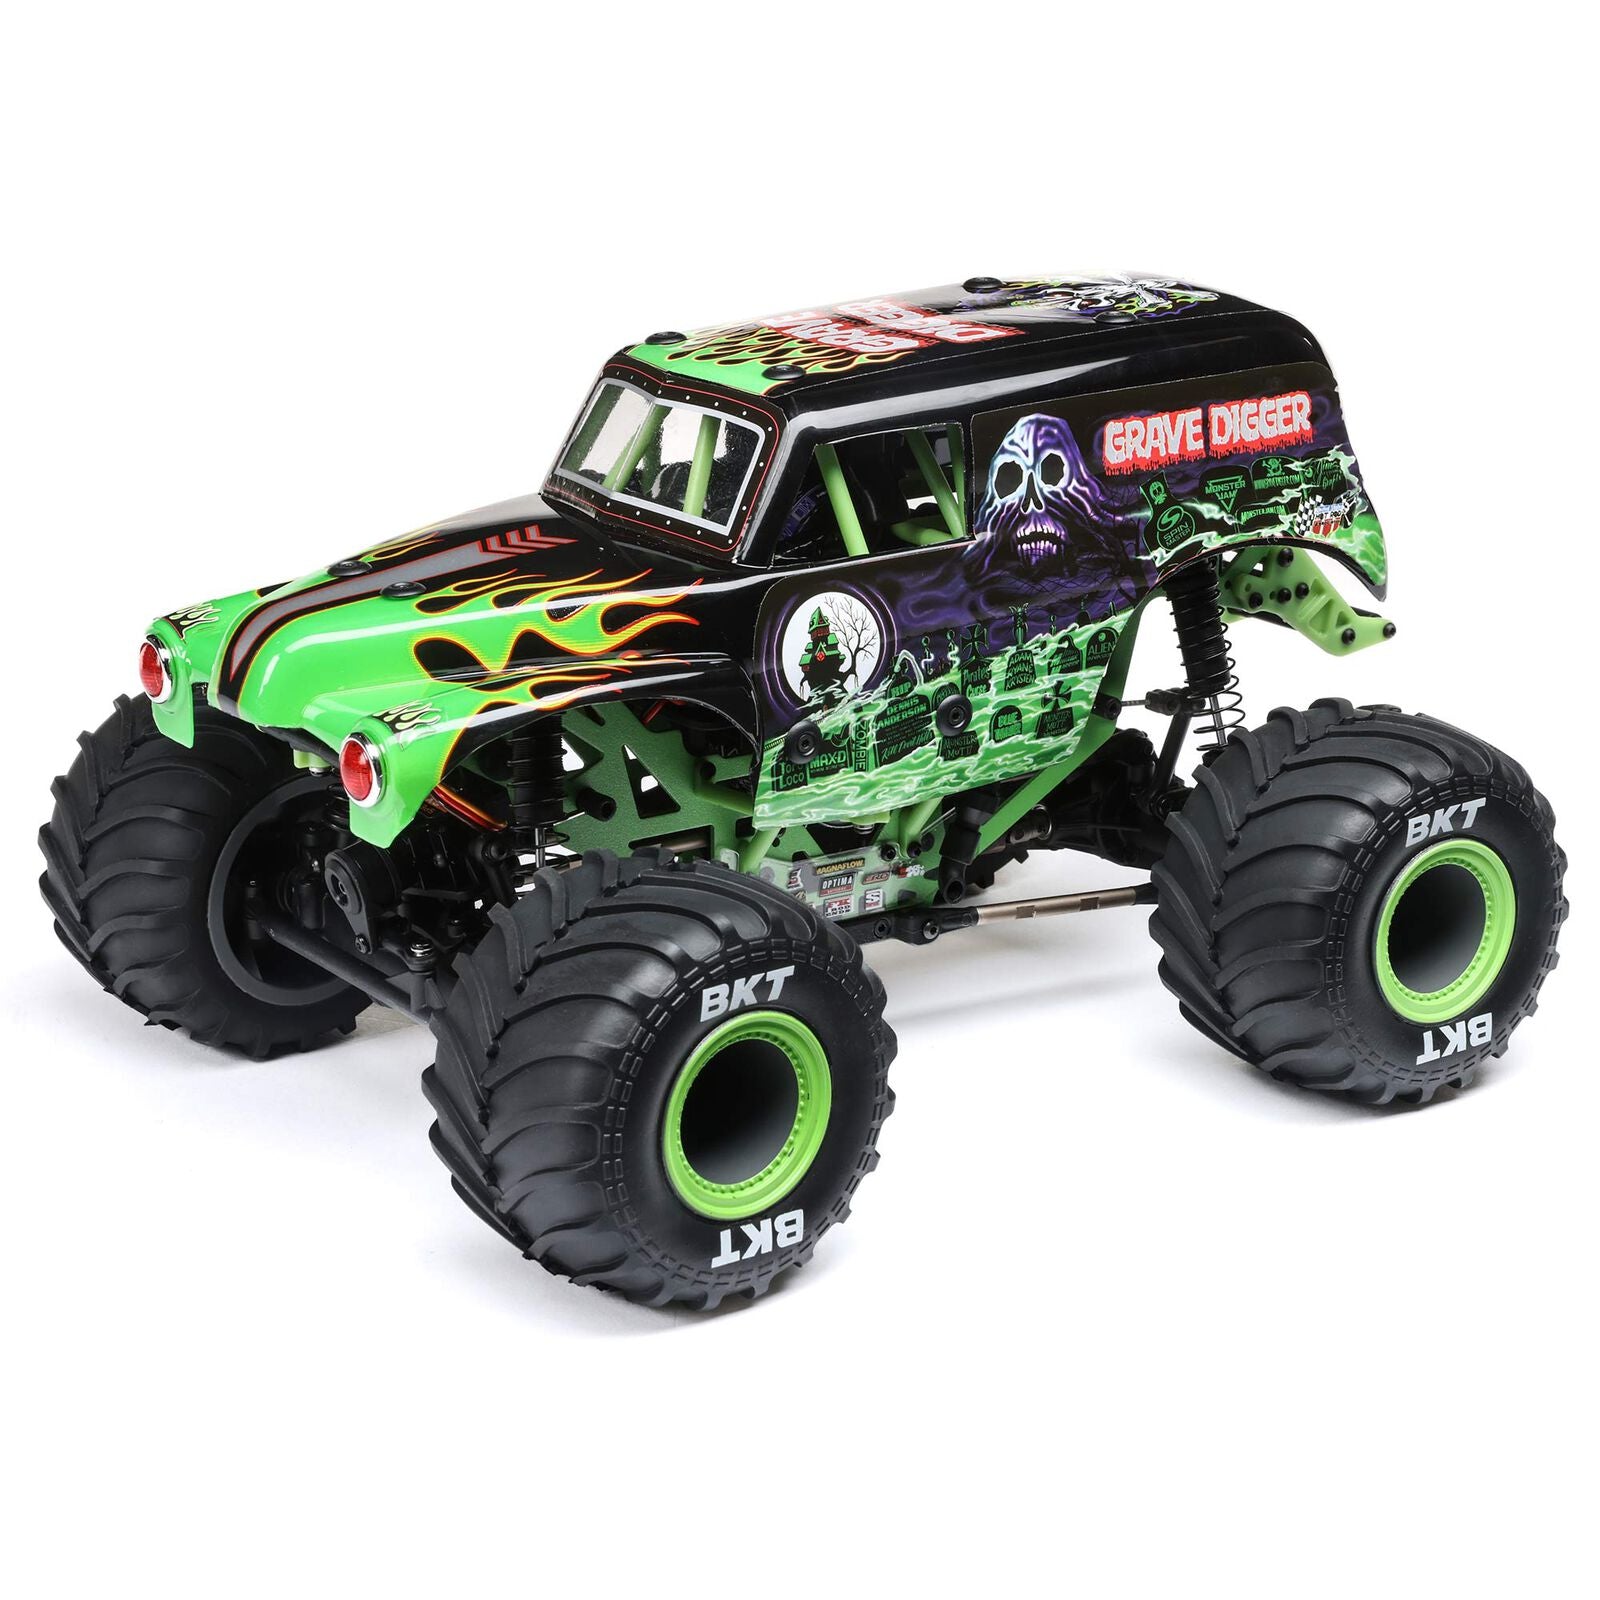 LOSI 1/18 Mini LMT 4X4 Brushed Monster Truck RTR, Grave Digger